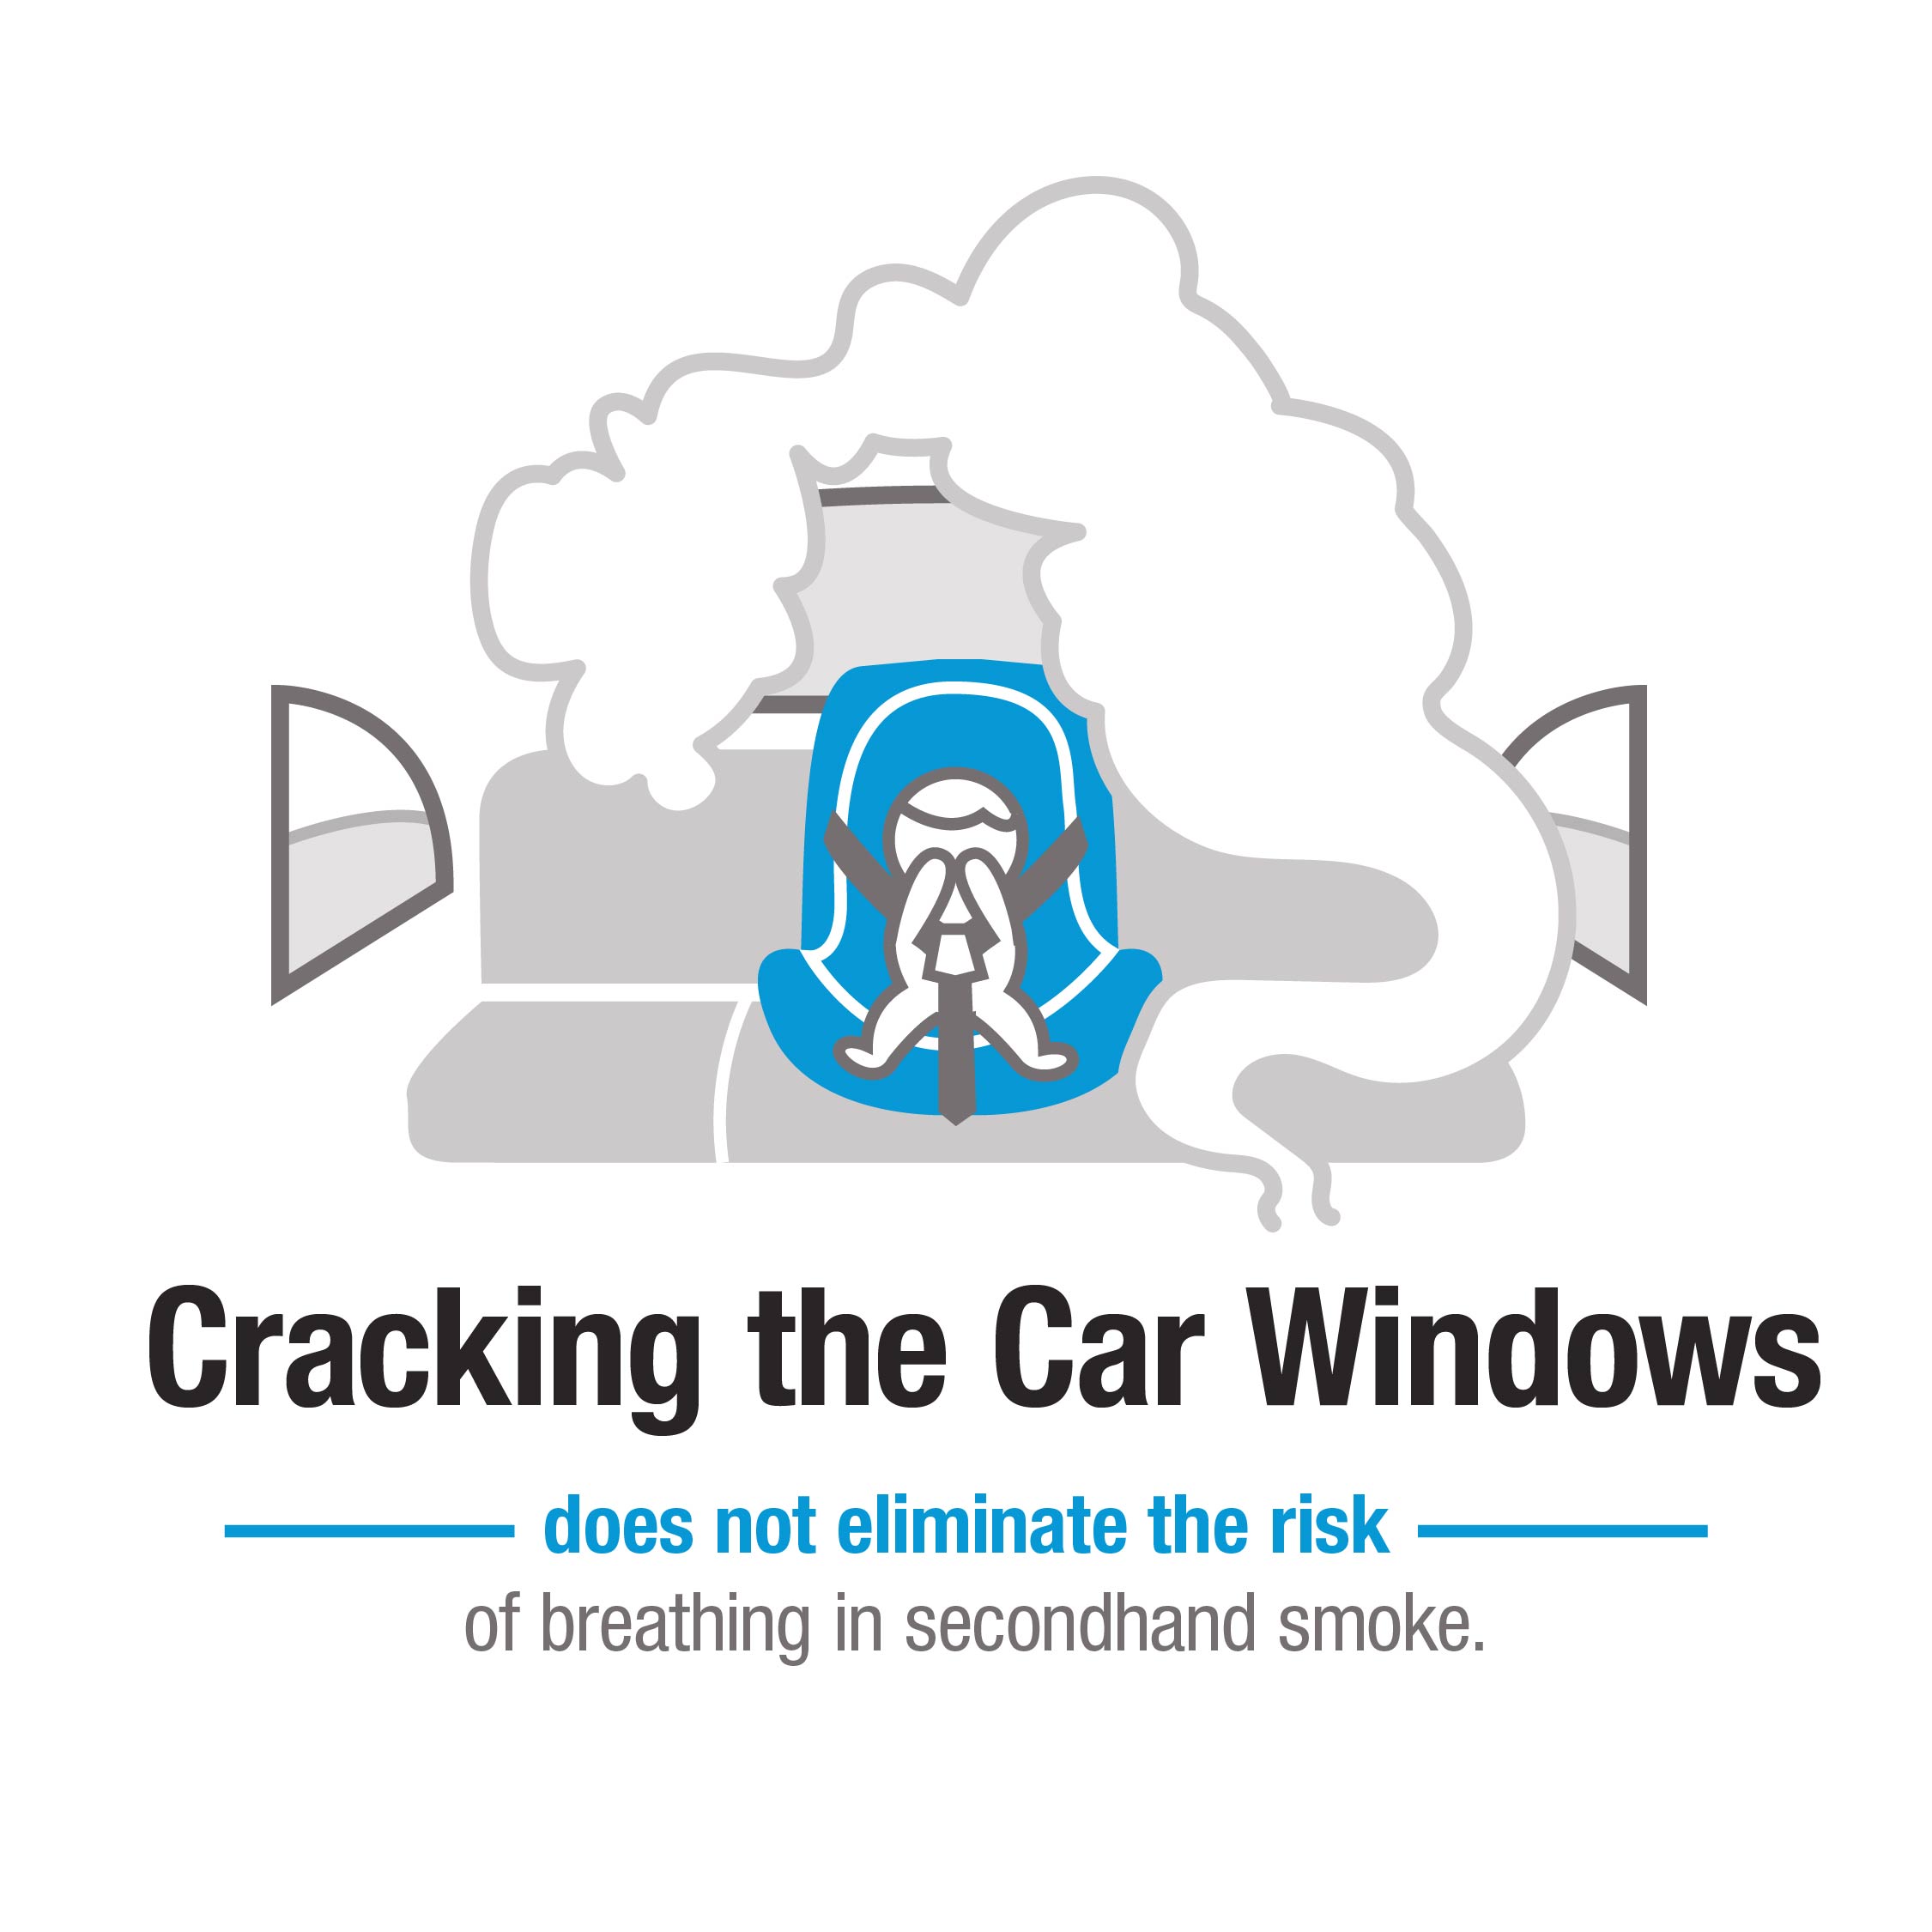 Cracking the car windows does not eliminate the risk of breathing in secondhand smoke.